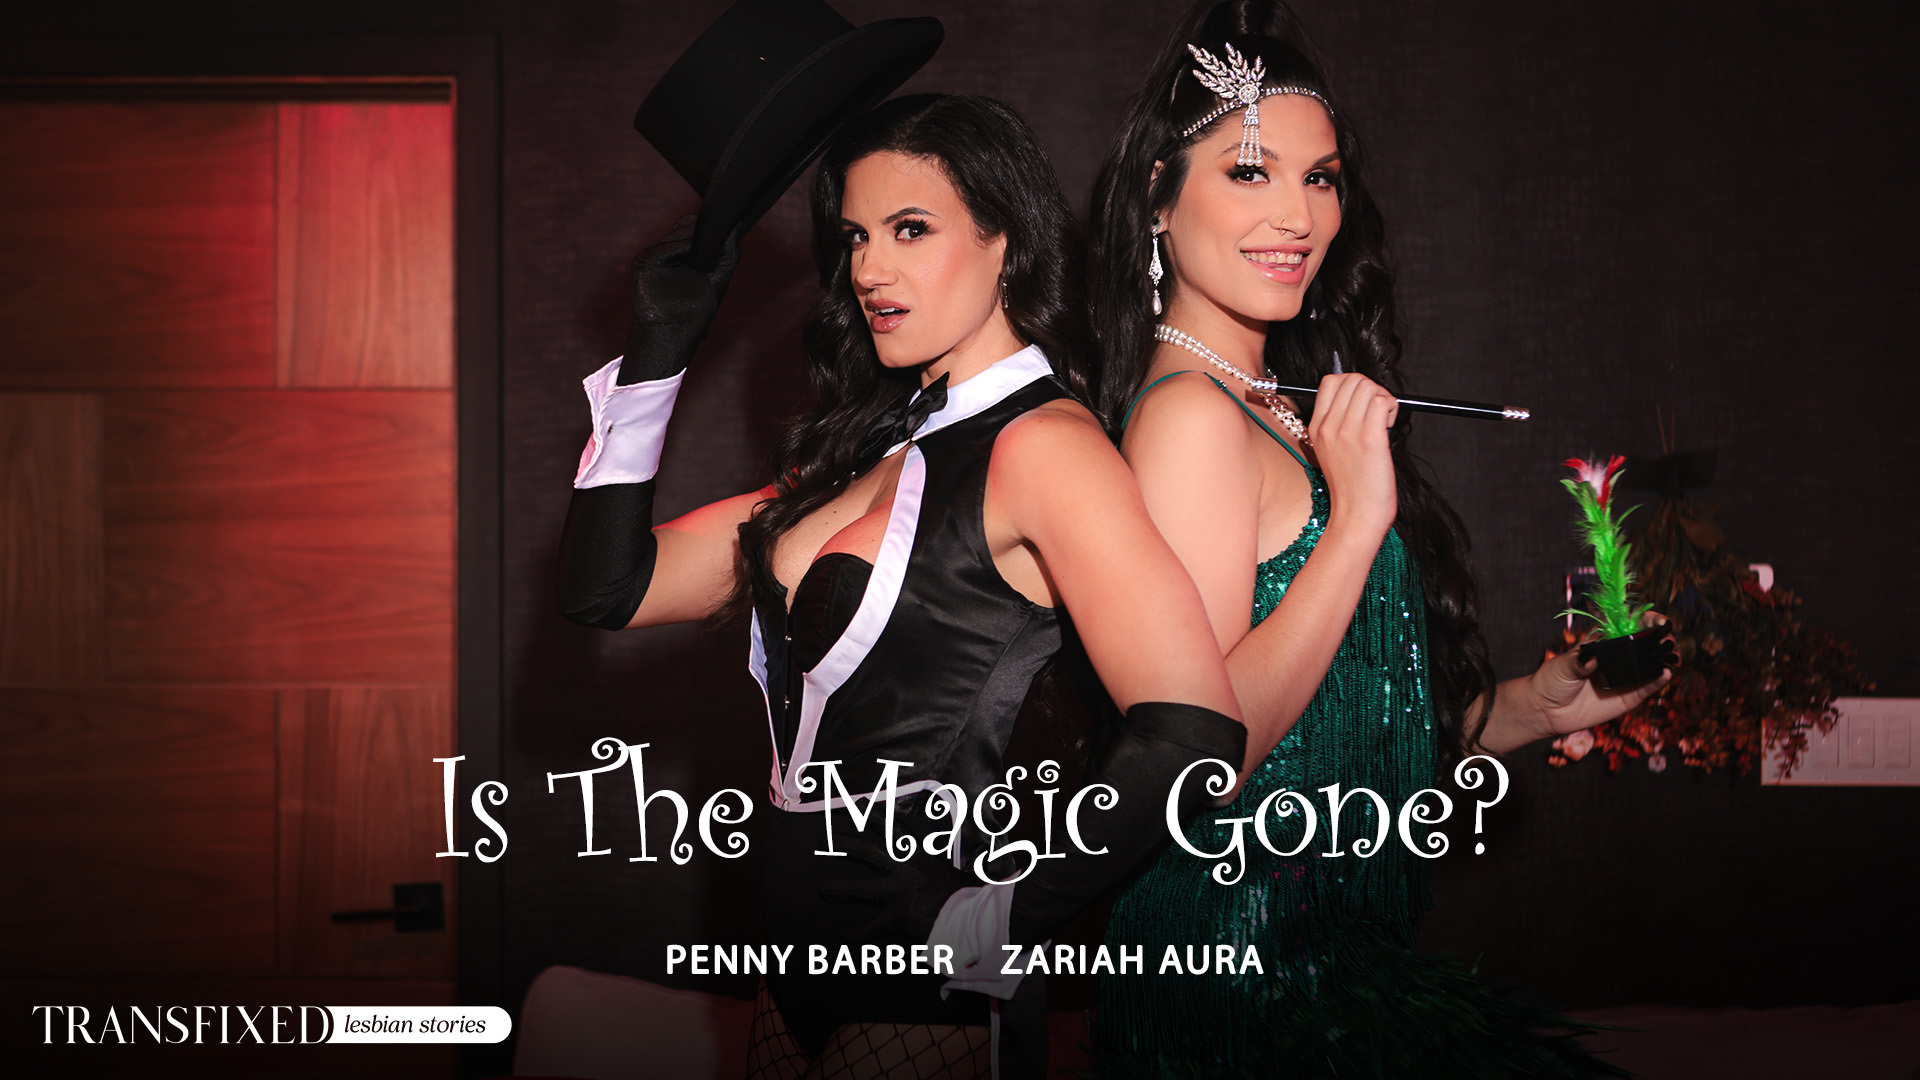 Is The Magic Gone?, Scene #01 with Penny Barber, Zariah Aura in Transfixed by Adult Time